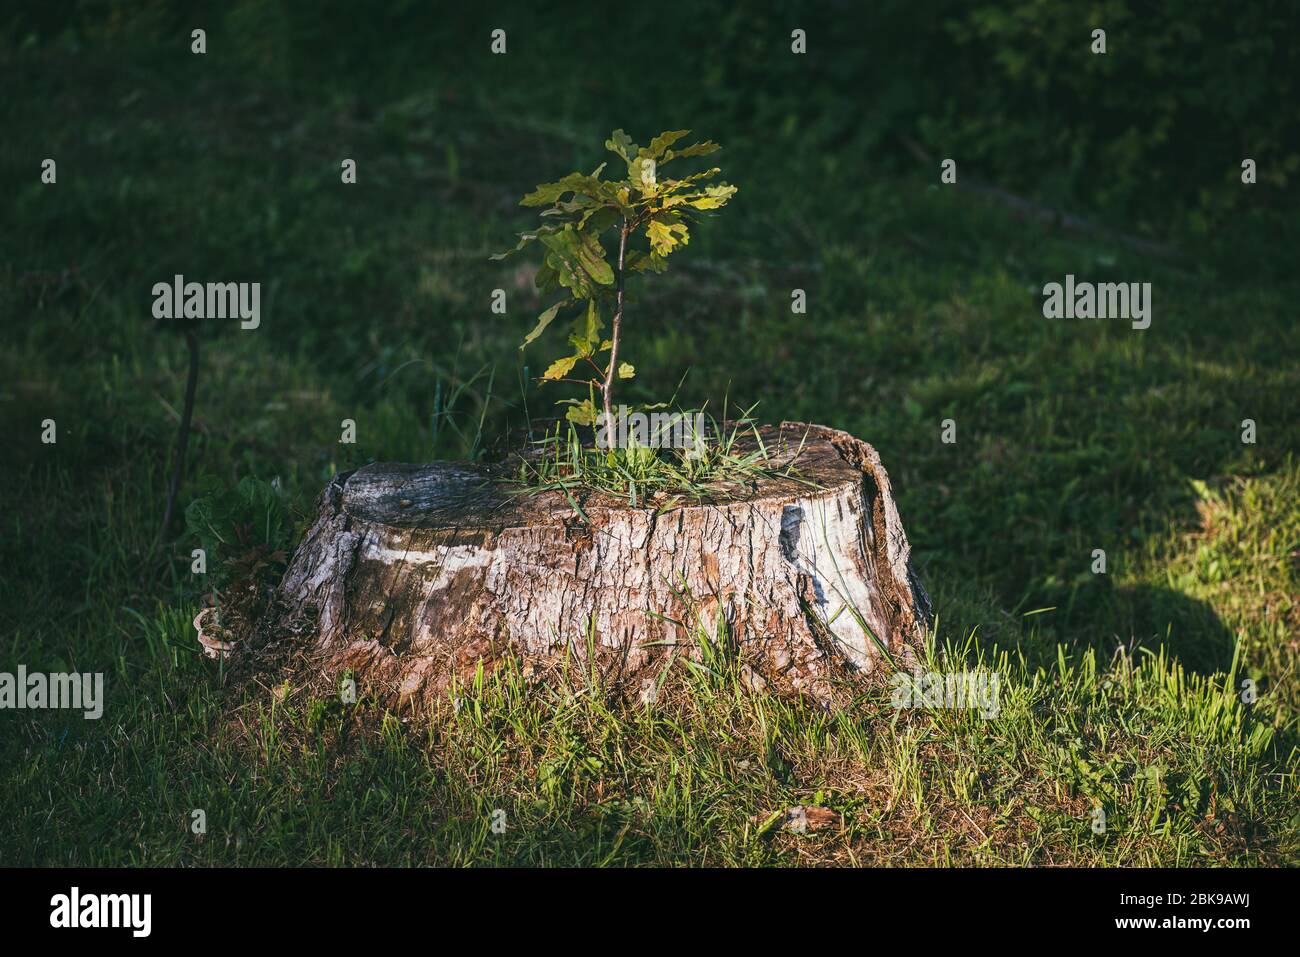 The green shoot of a young oak tree grows from the stump of a tree that was once cut down. The concept of overcoming and the idea that we should never Stock Photo